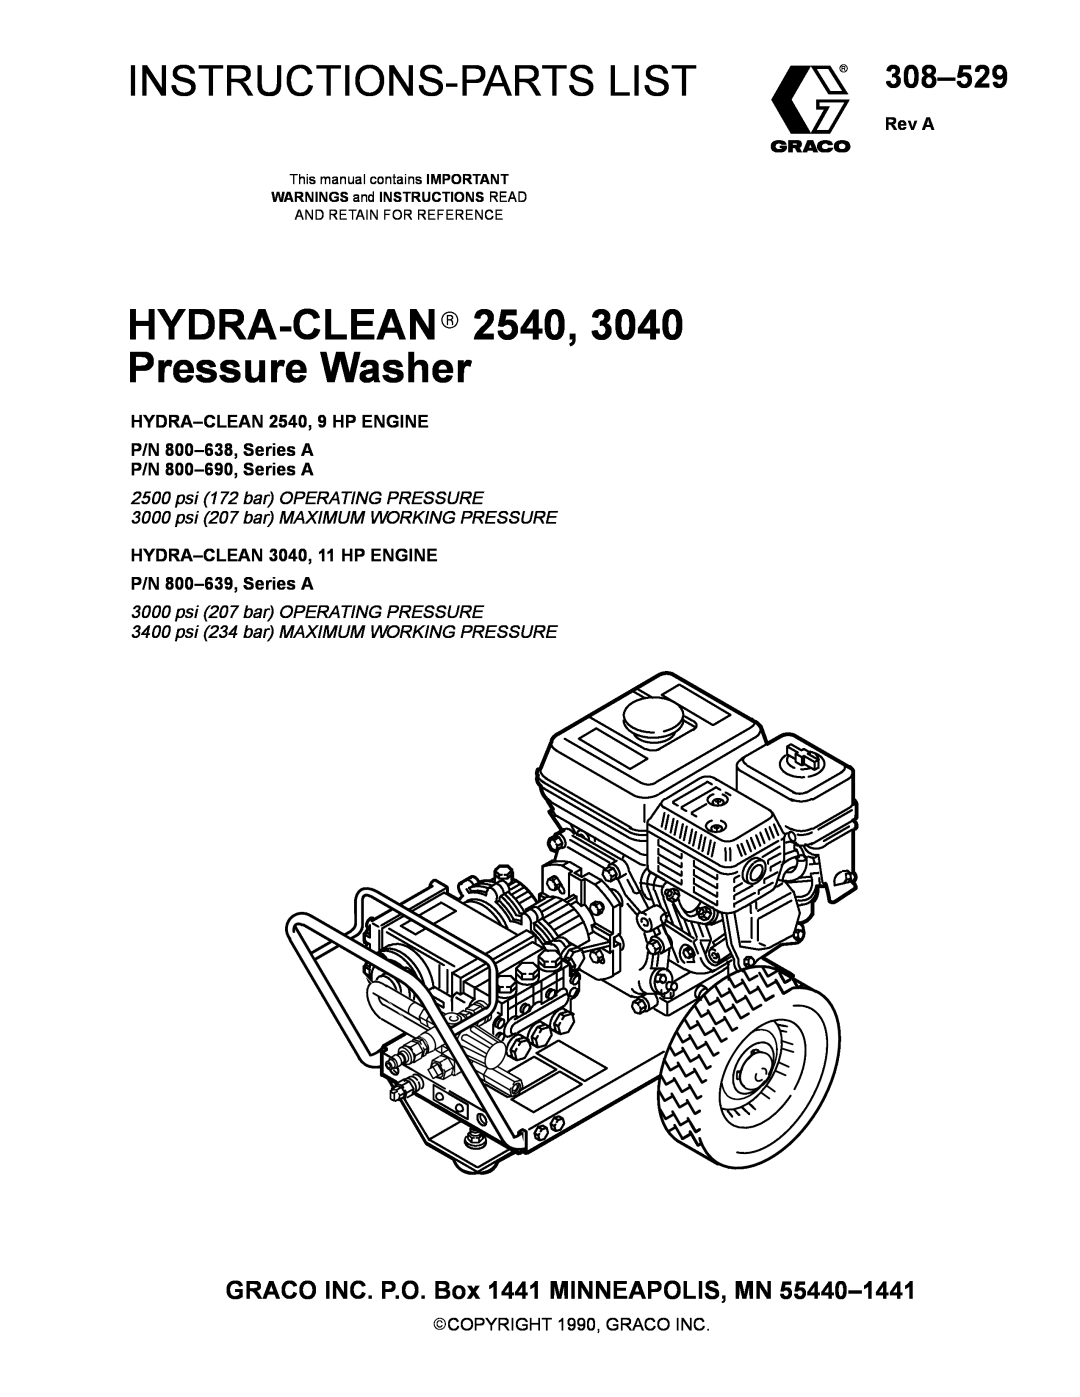 Graco Inc 800-639 manual Instructions-Partslist, HYDRA-CLEAN 2540, Pressure Washer, 308-529, Rev A, P/N 800-690,Series A 